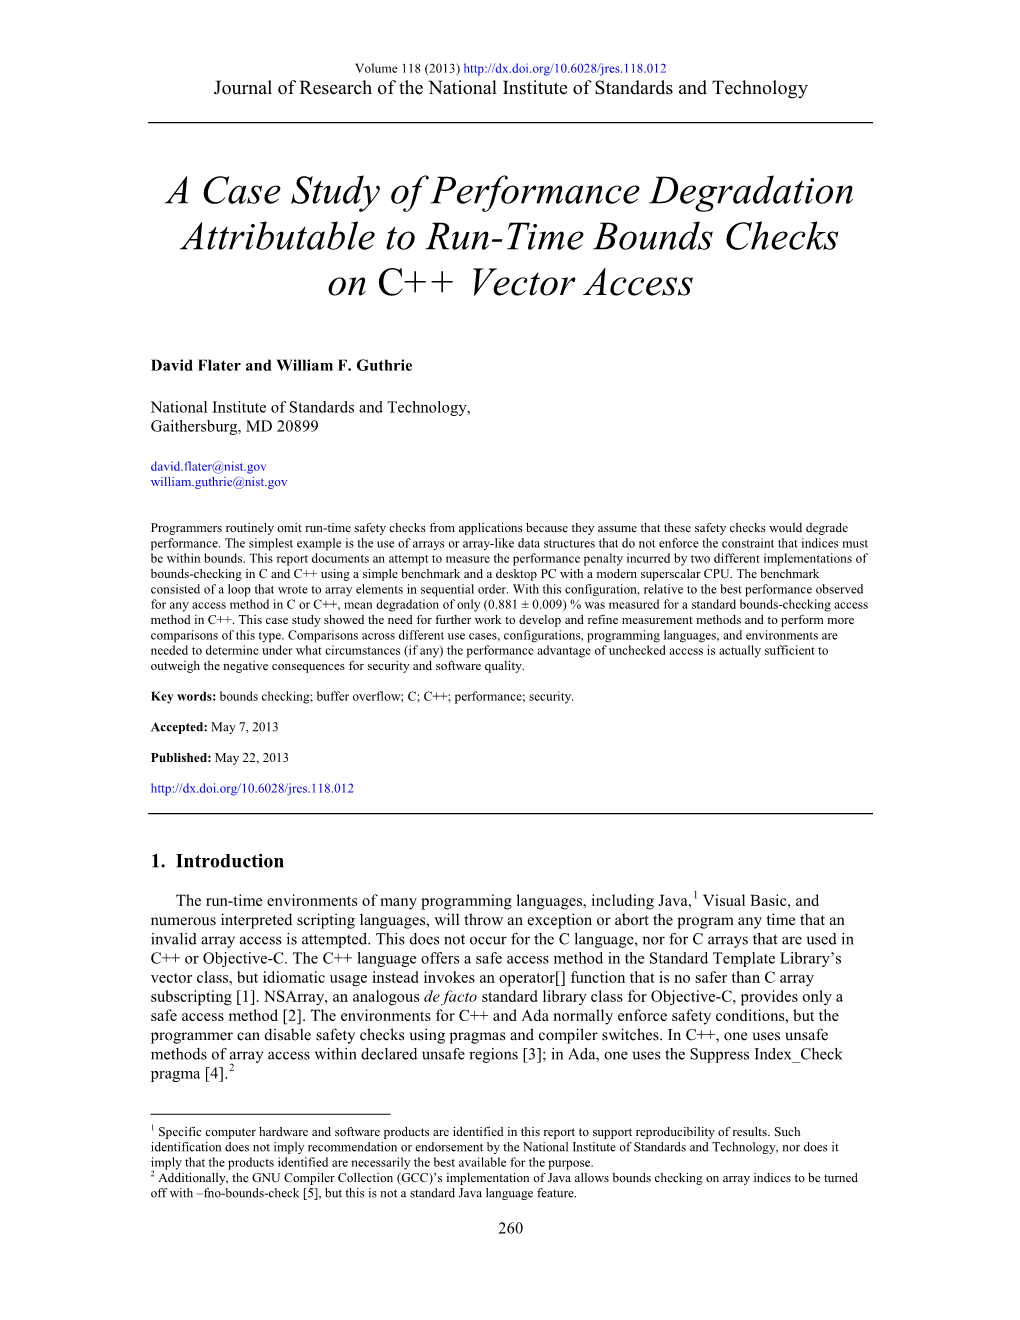 A Case Study of Performance Degradation Attributable to Run-Time Bounds Checks on C++ Vector Access